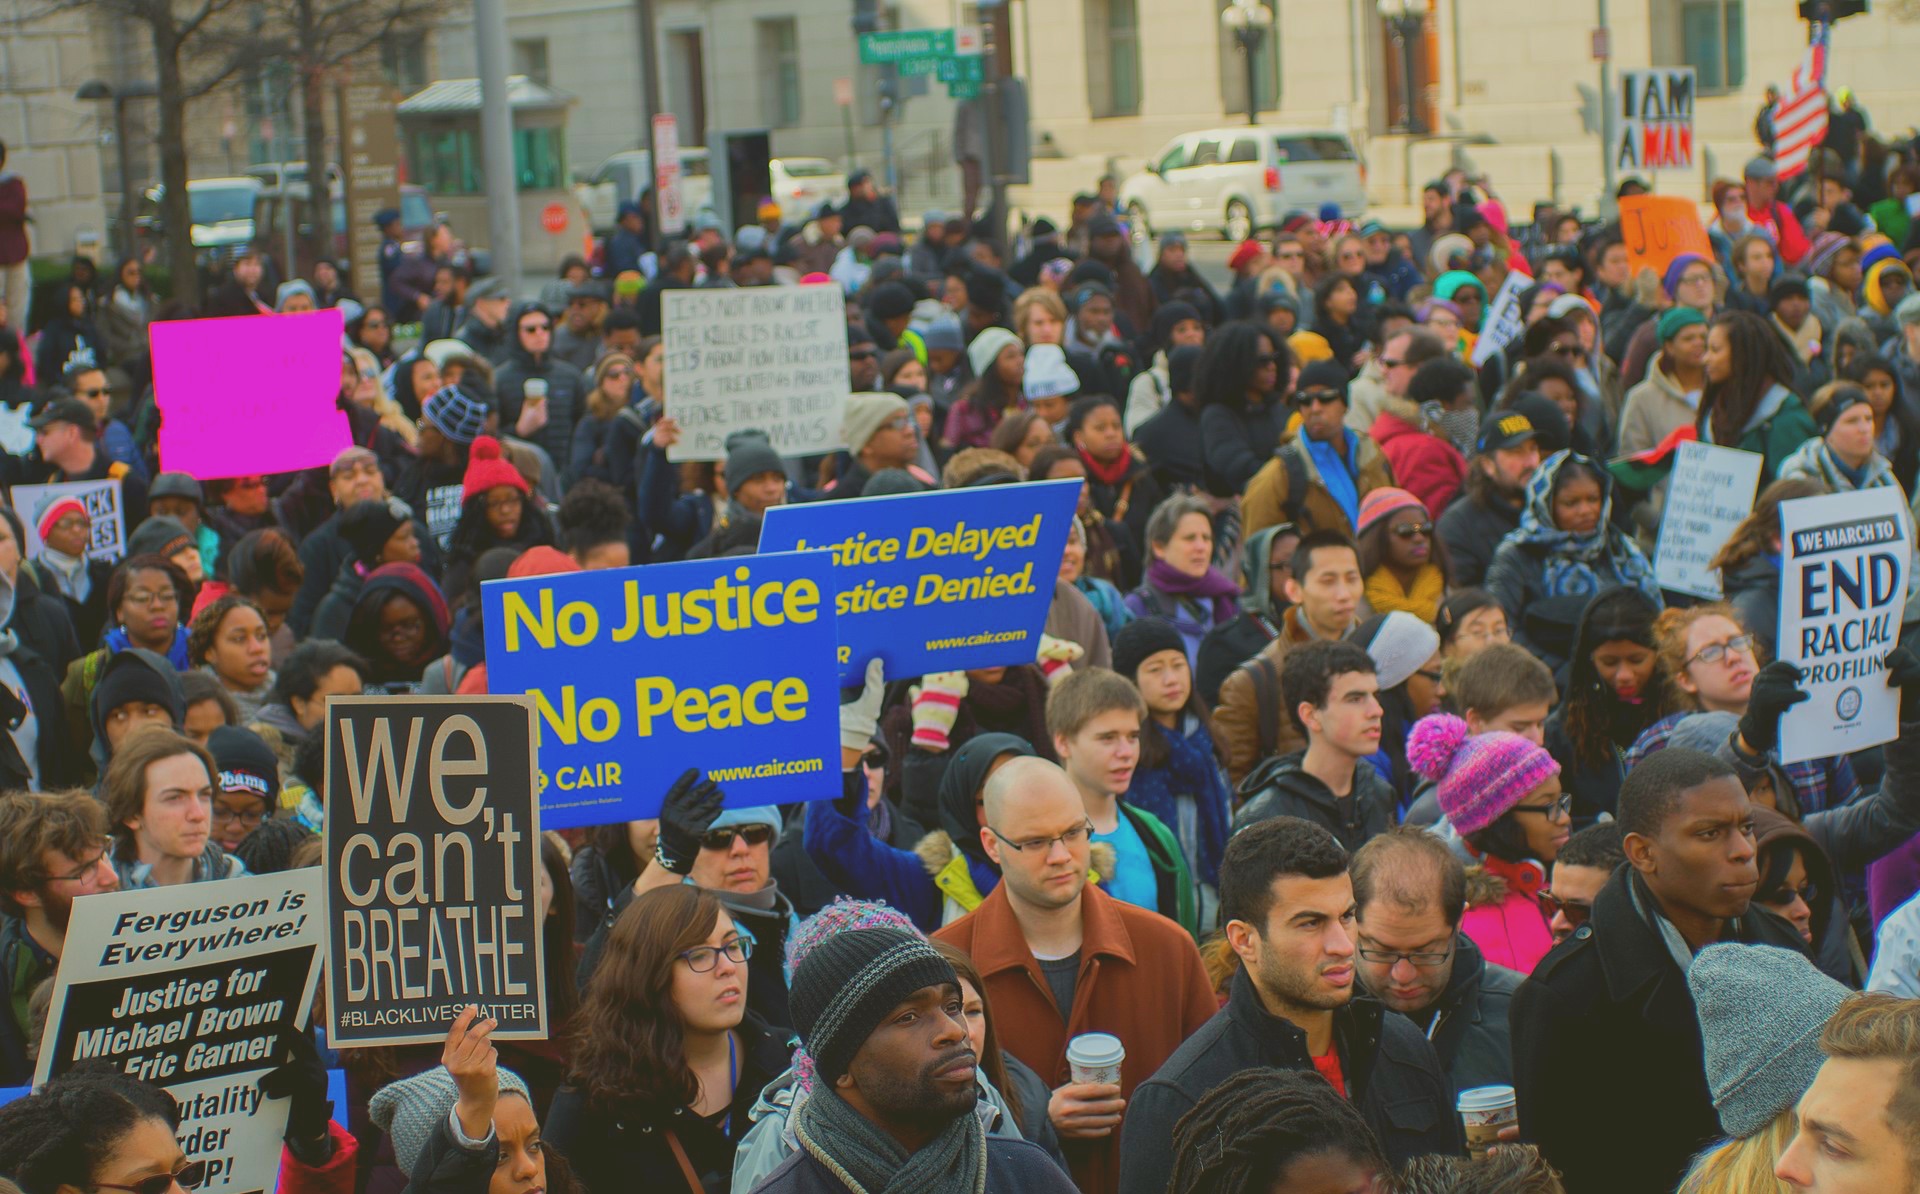 1920px-Justice_for_All_March_-_Dec._13_2014_16017589441-1.jpg